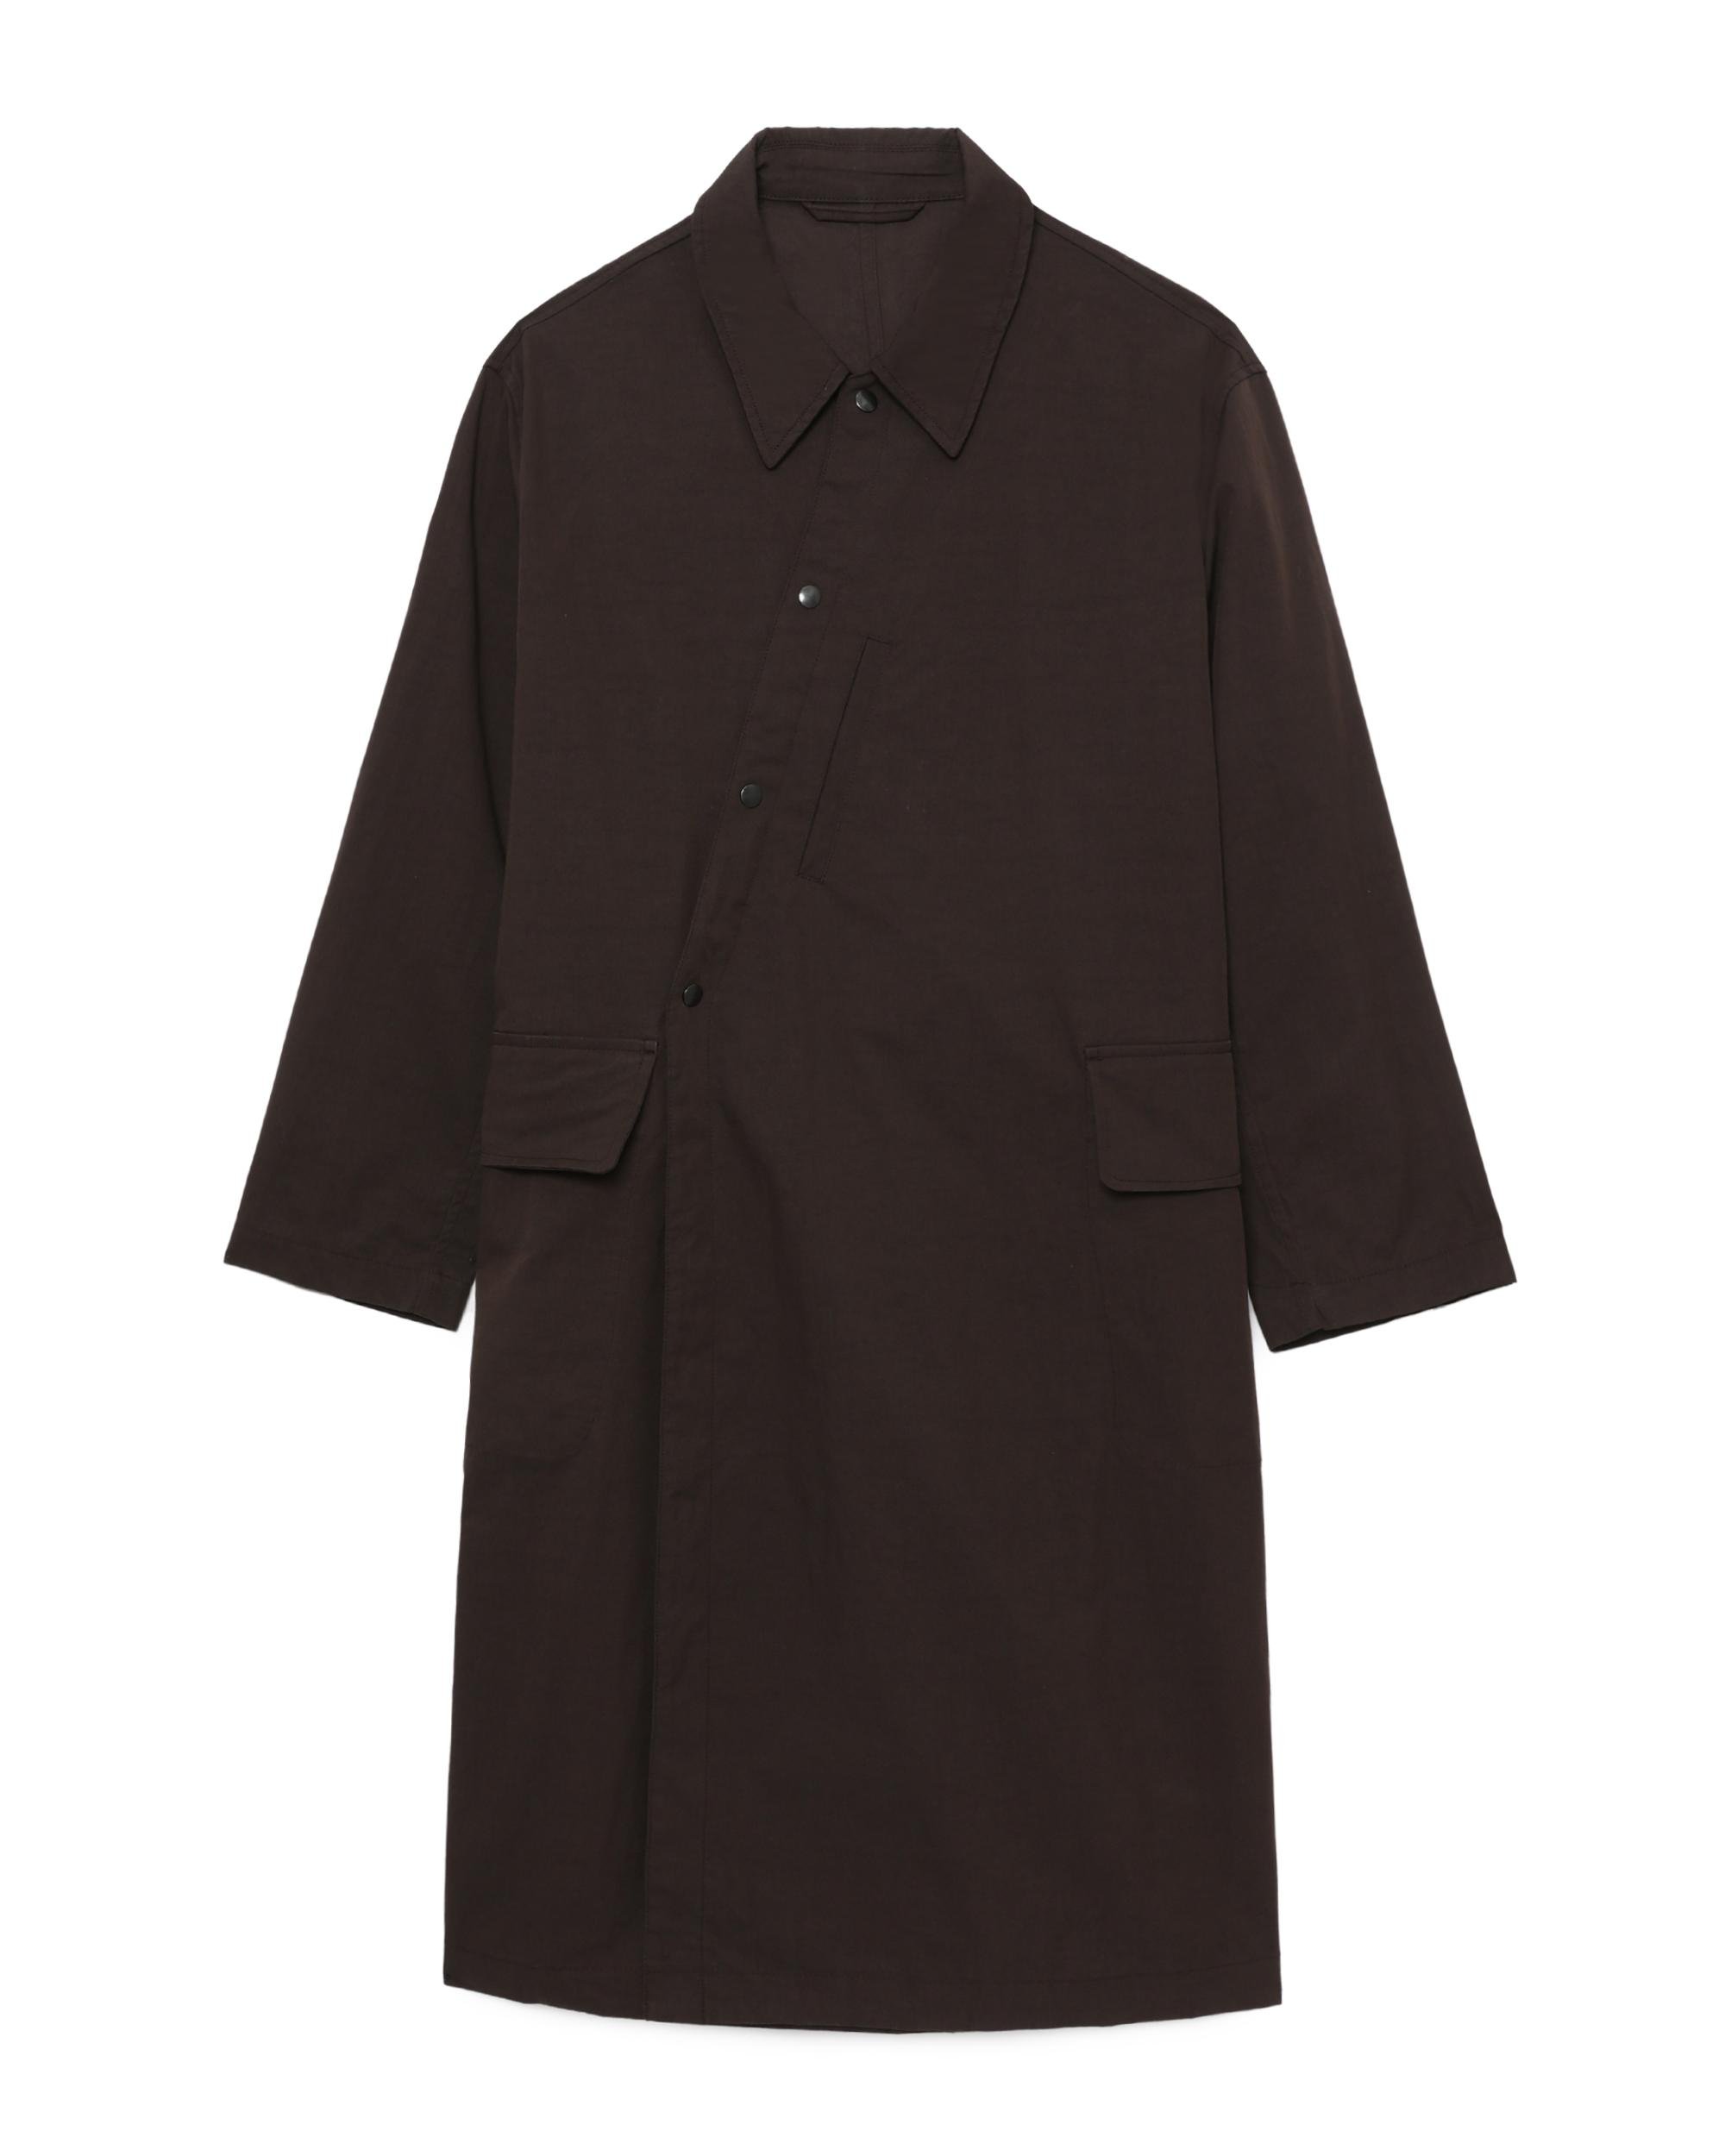 Double breasted trench coat by LEMAIRE